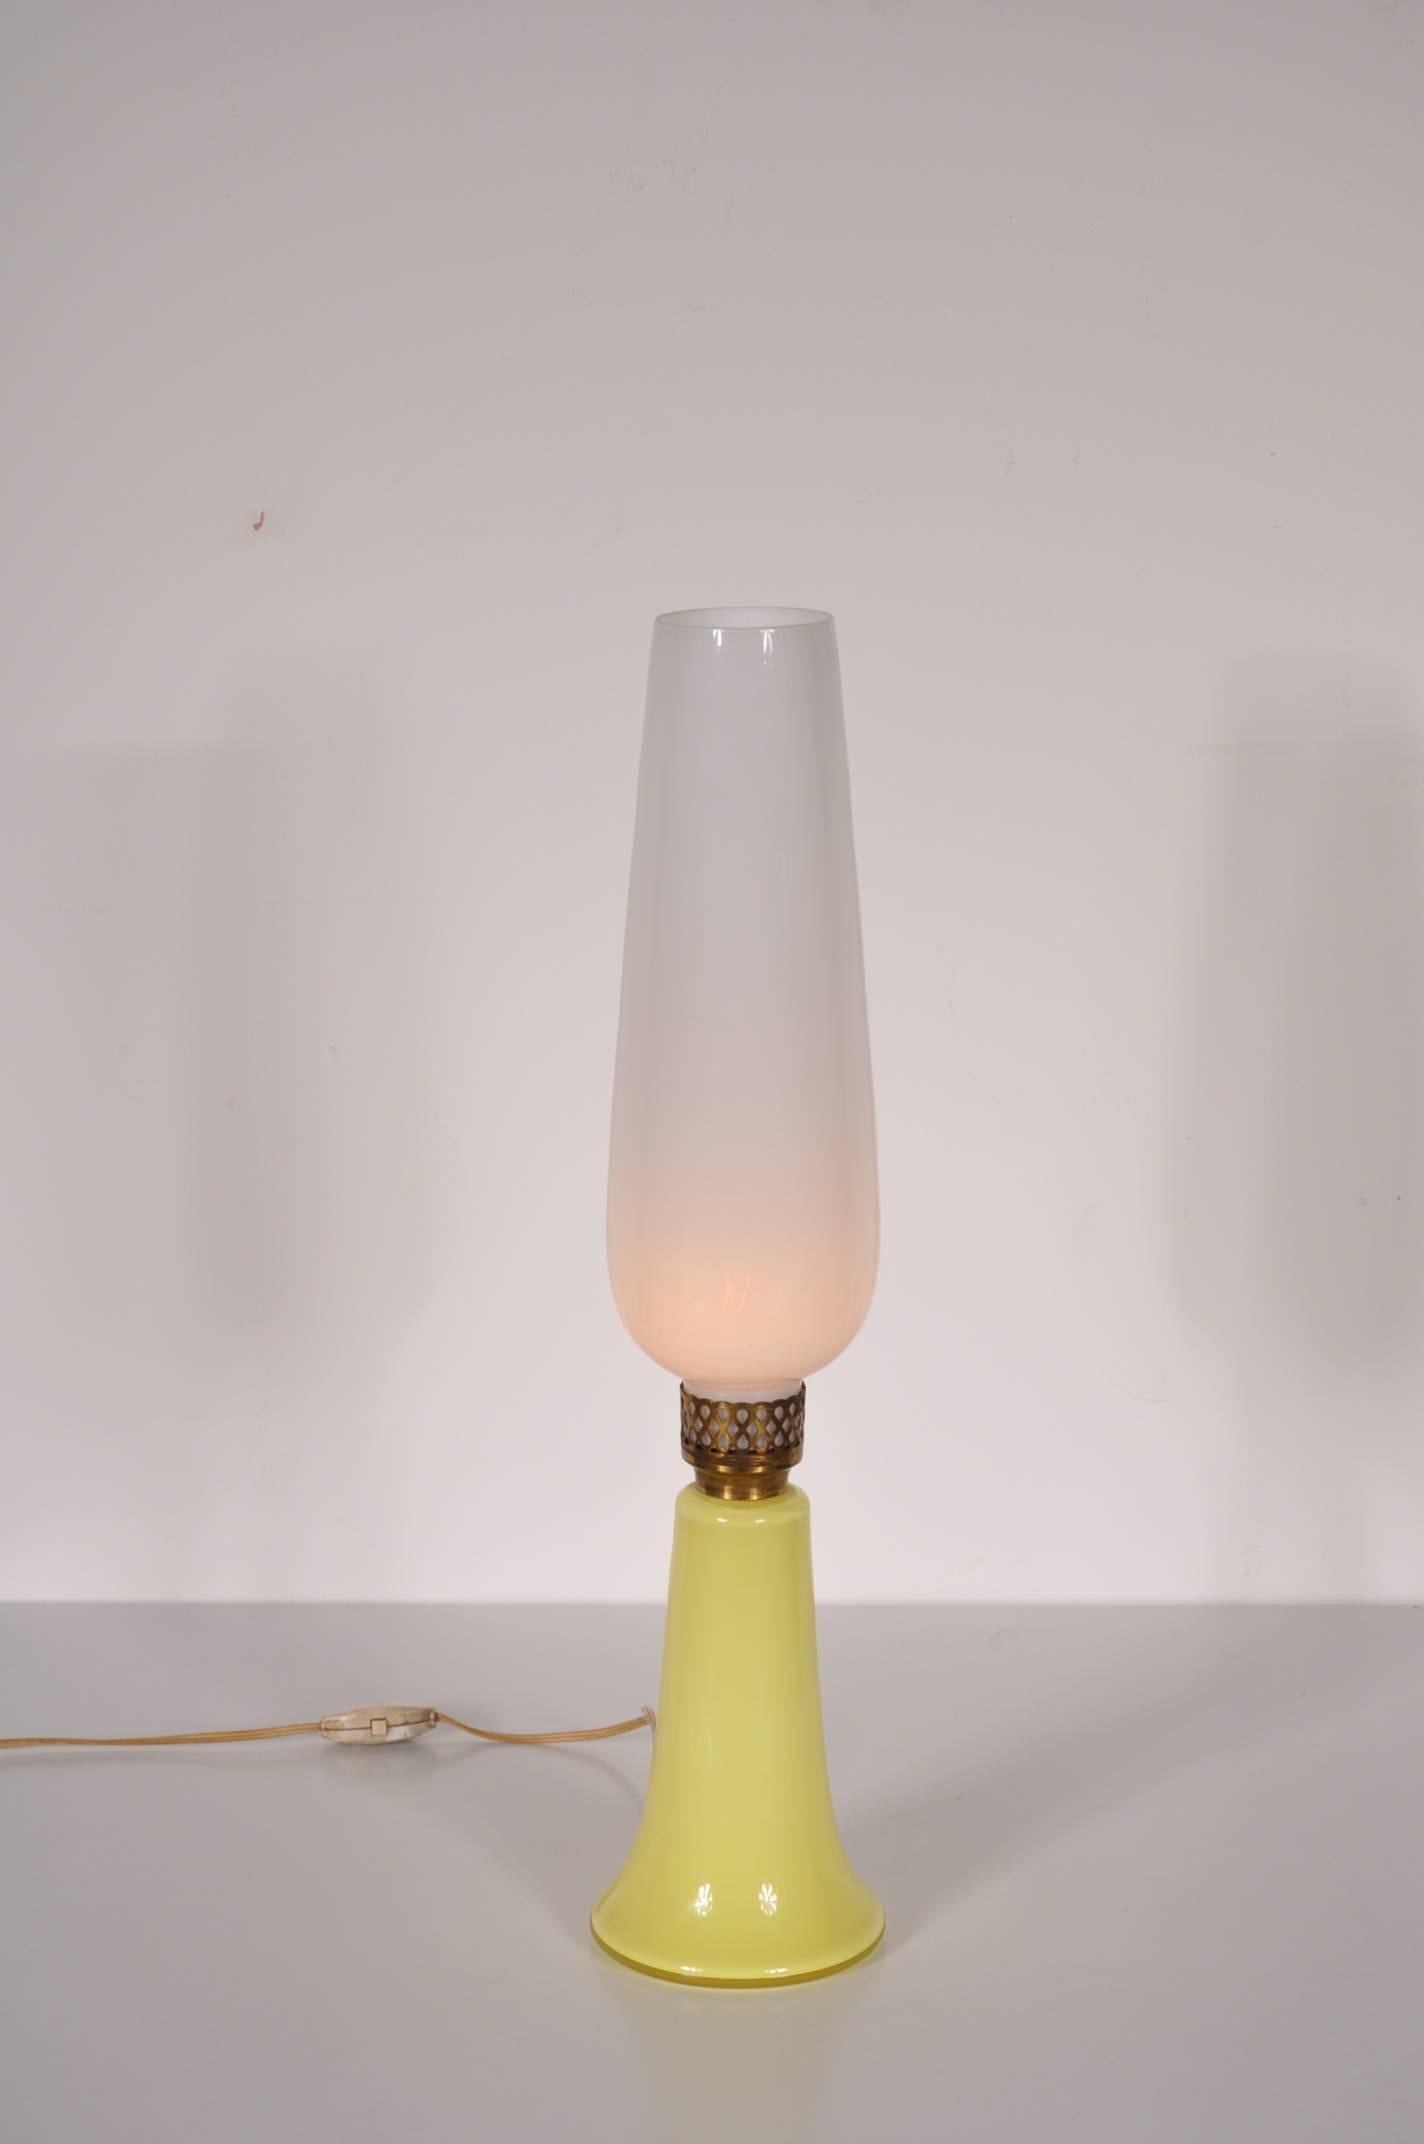 Beautiful table lamp by Venini, manufactured in Venice, Italy, circa 1950.

This piece is made of high quality glass. It has a yellow glass and with brass details, giving it a unique and luxurious appearance. It is stickered and engraved.

In